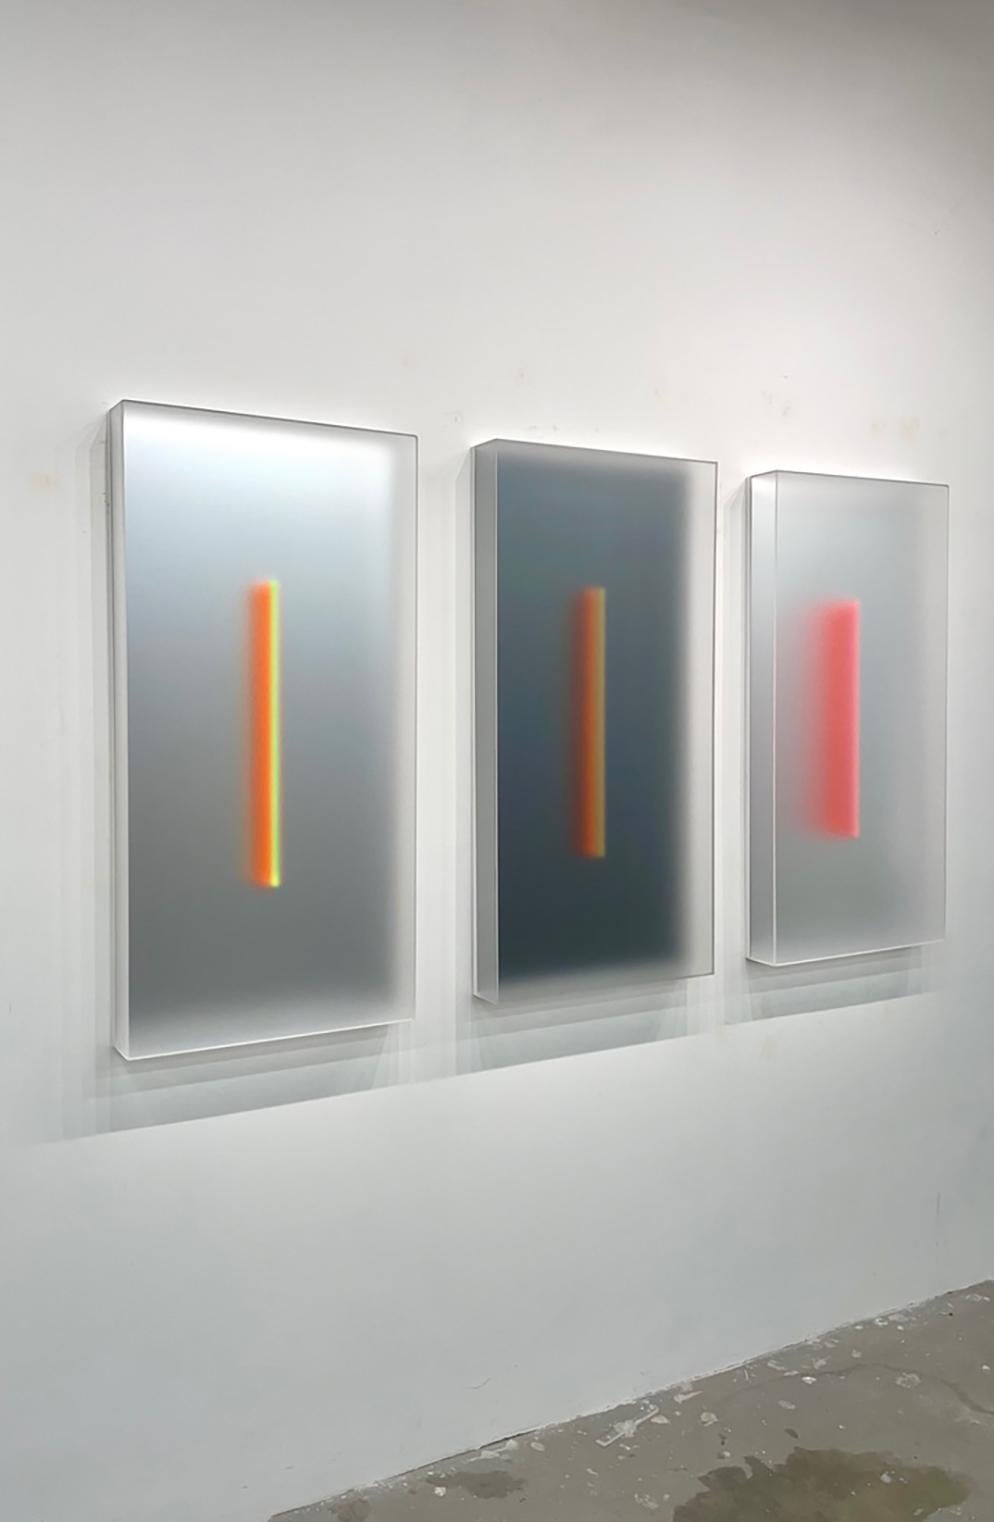 In the first of his newest series, Light-Glyphs, a range of colors illuminate the interior of translucent sculptural boxes. Light diffuses through their frosted surfaces and softens the colors within. At the center, a thin blade of colorful